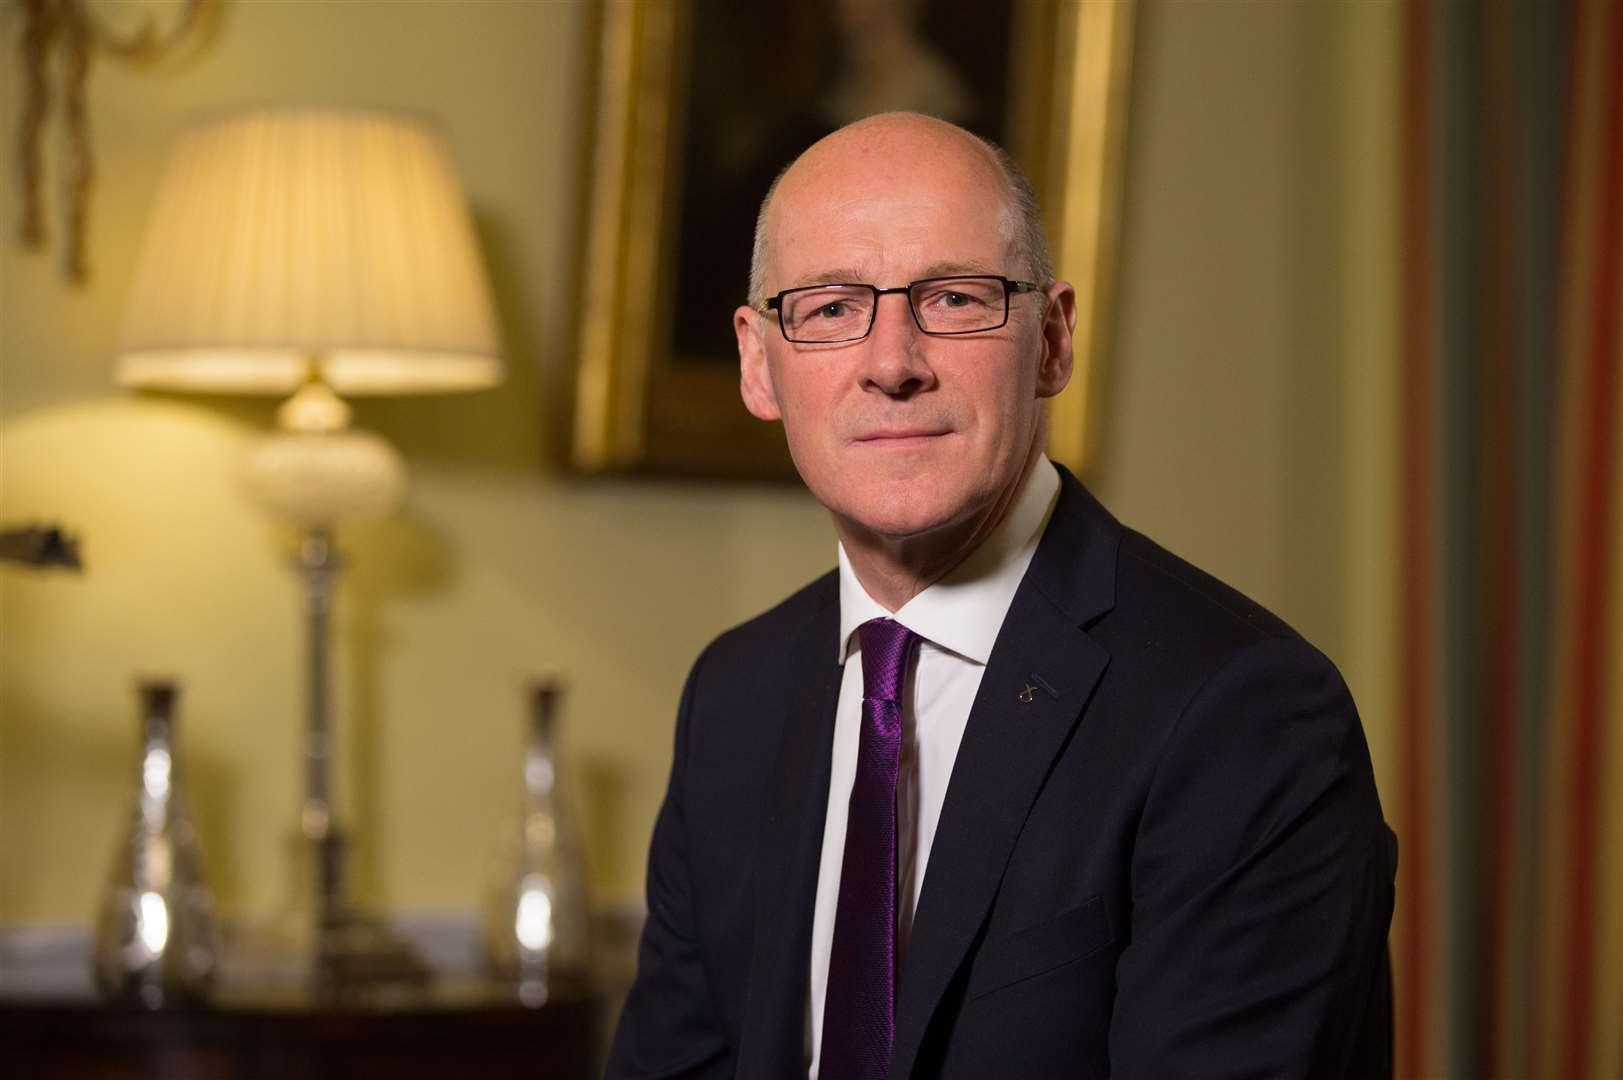 John Swinney says a full-time return to classrooms in August will remain conditional and dependent on scientific and health advice.